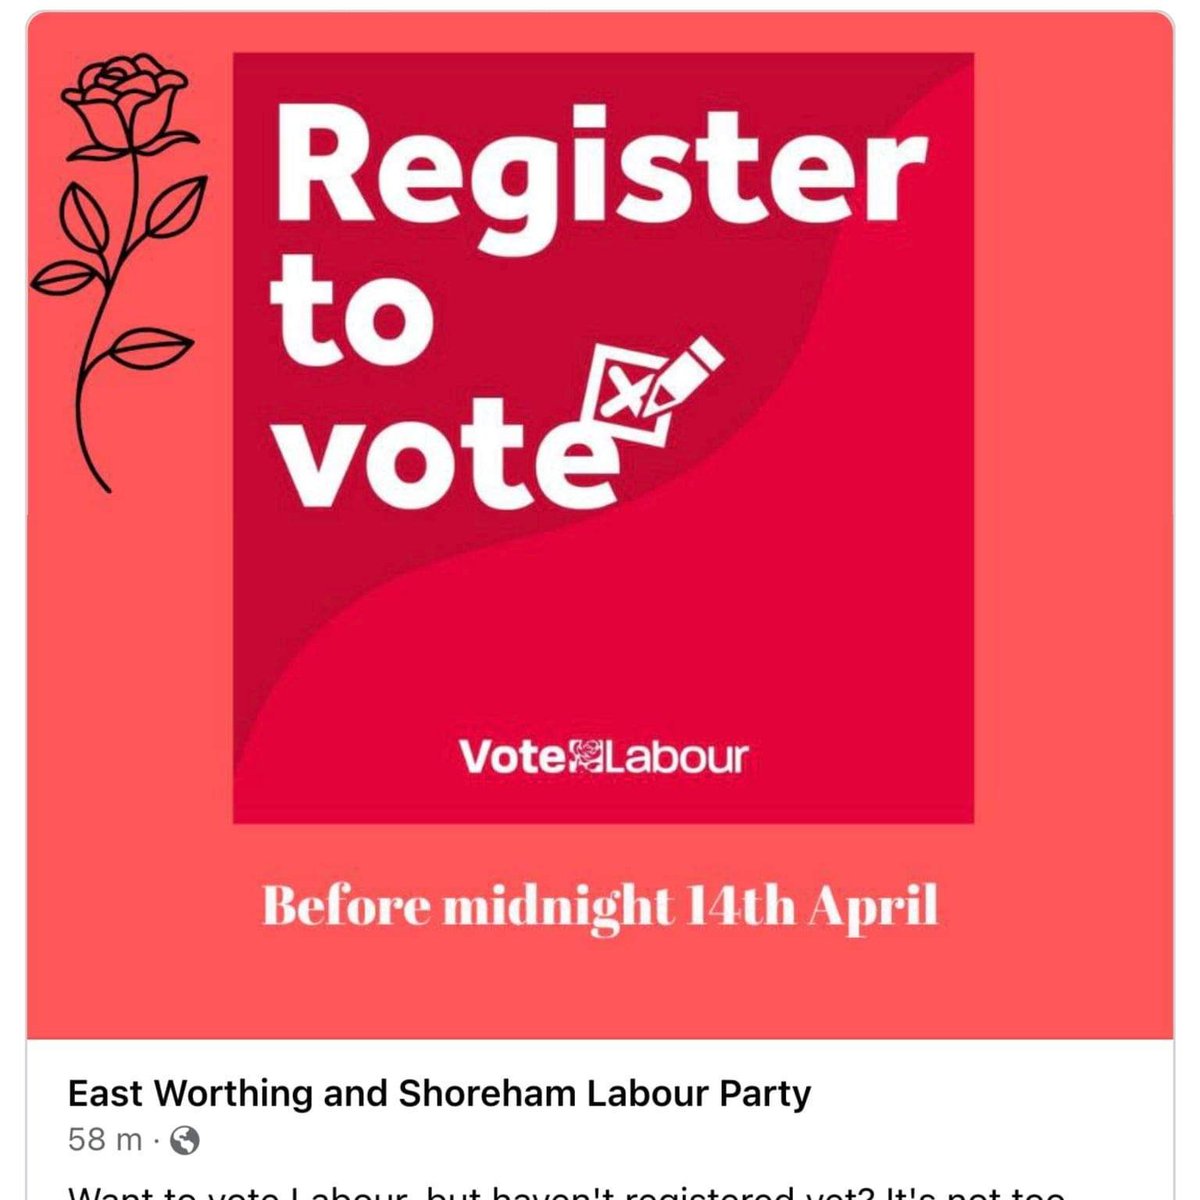 Want to vote, but haven't registered yet? Tomorrow is the deadline. We need change in #Worthing and Labour only need one more councillor to have a majority You have until tomorrow 14th April, midnight to register here: gov.uk/register-to-vo…